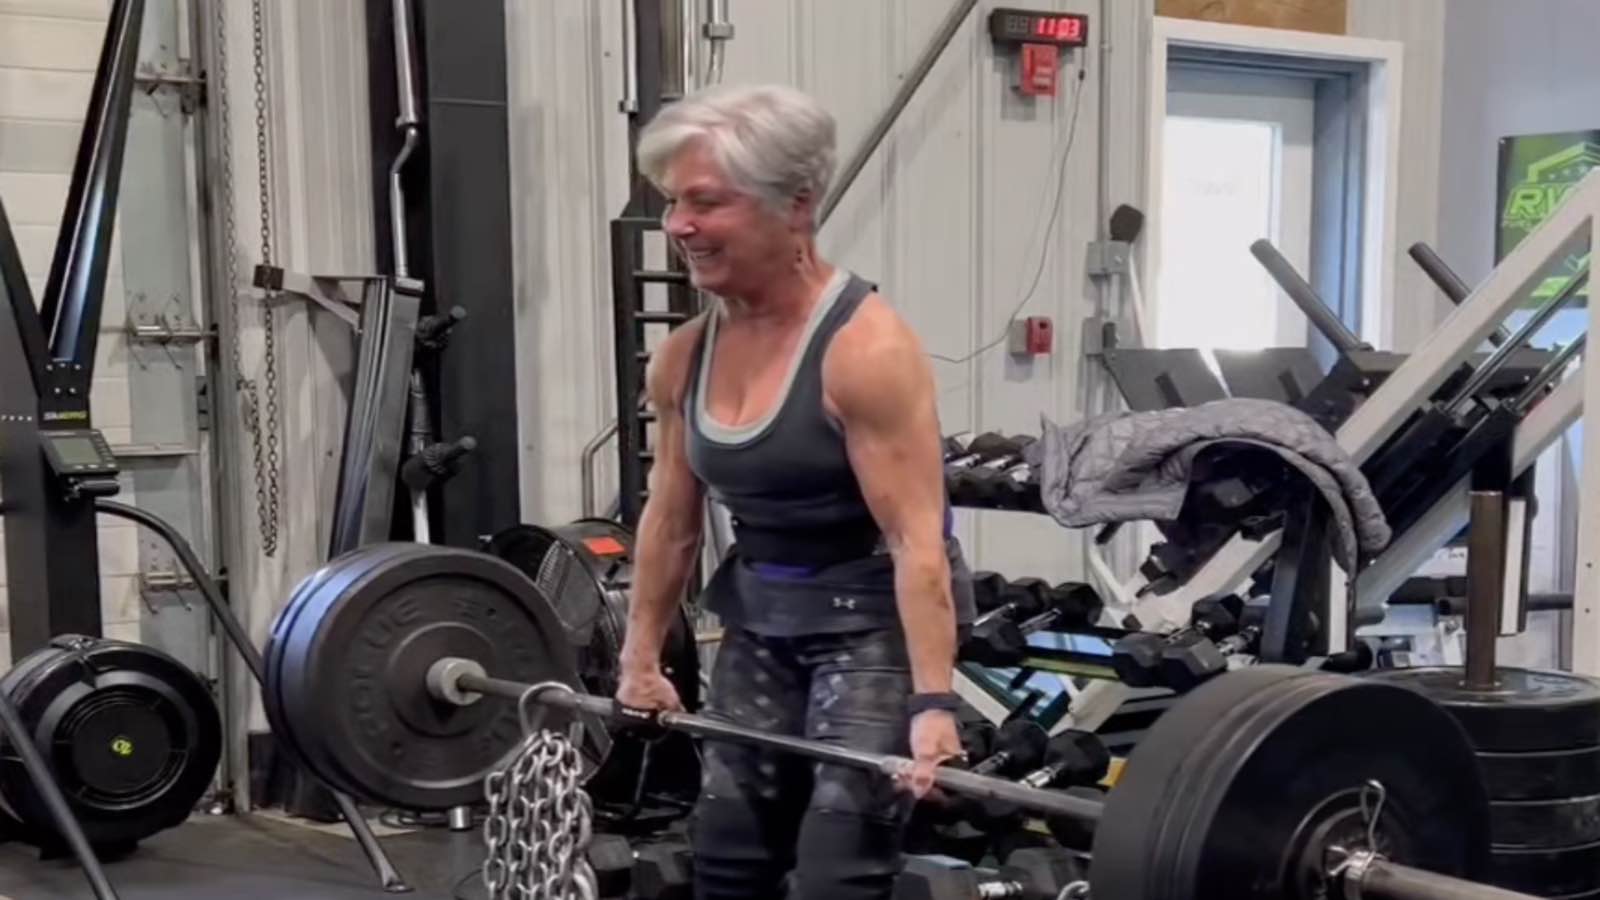 73-Year-Old Powerlifter Mary Duffy Deadlifts Nearly Triple Bodyweight — 140.6 Kilograms (310 Pounds) with Chains